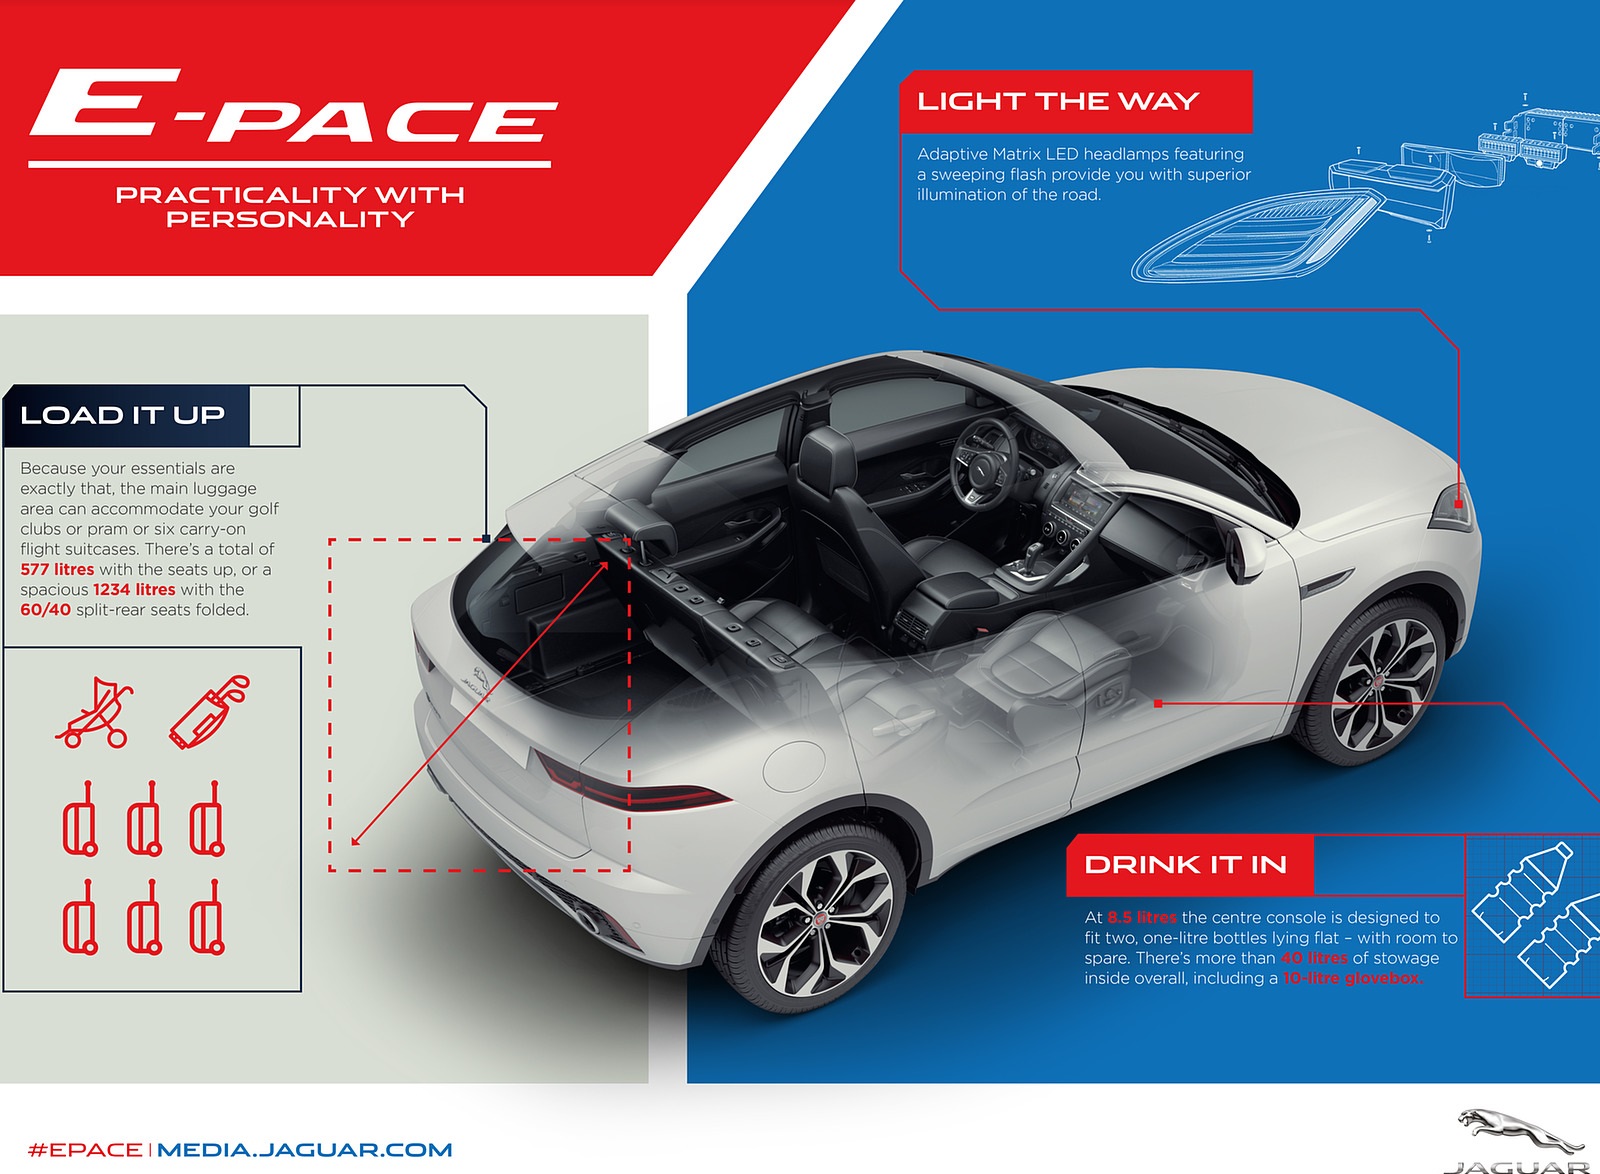 2018 Jaguar E-PACE Infographic Wallpapers  #90 of 100